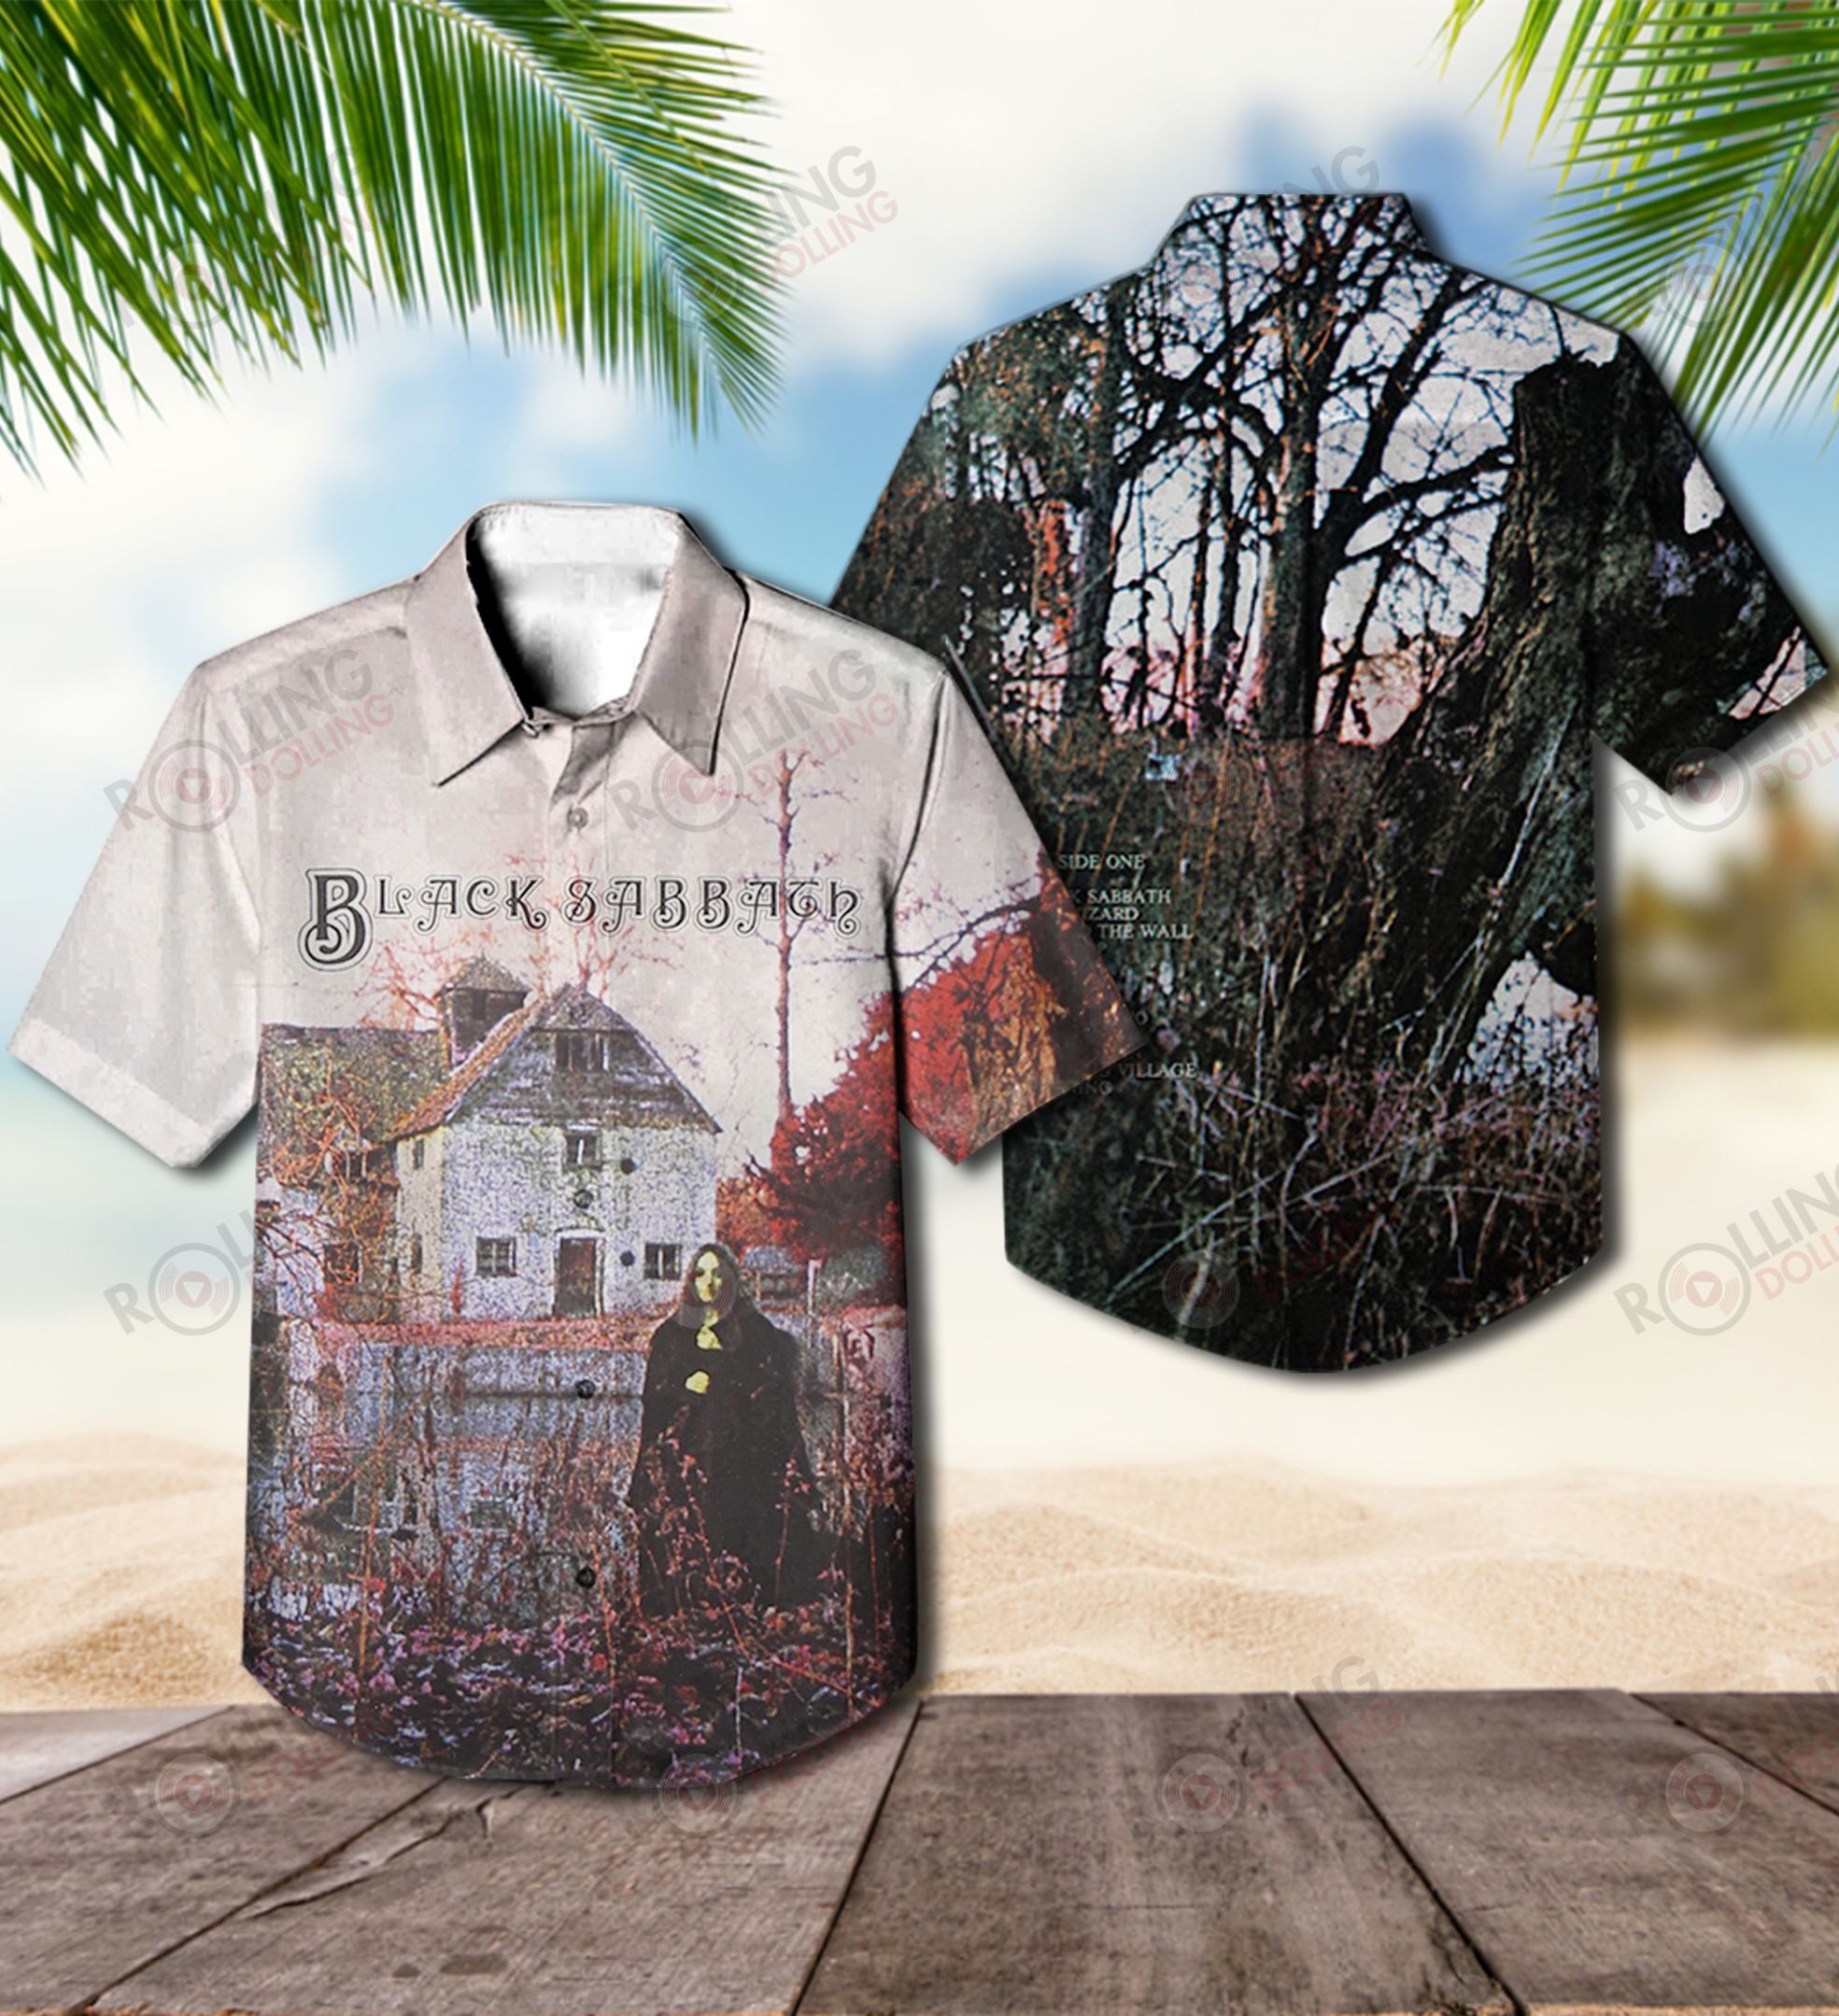 These Hawaiian Shirt will be a great choice for any type of occasion 167